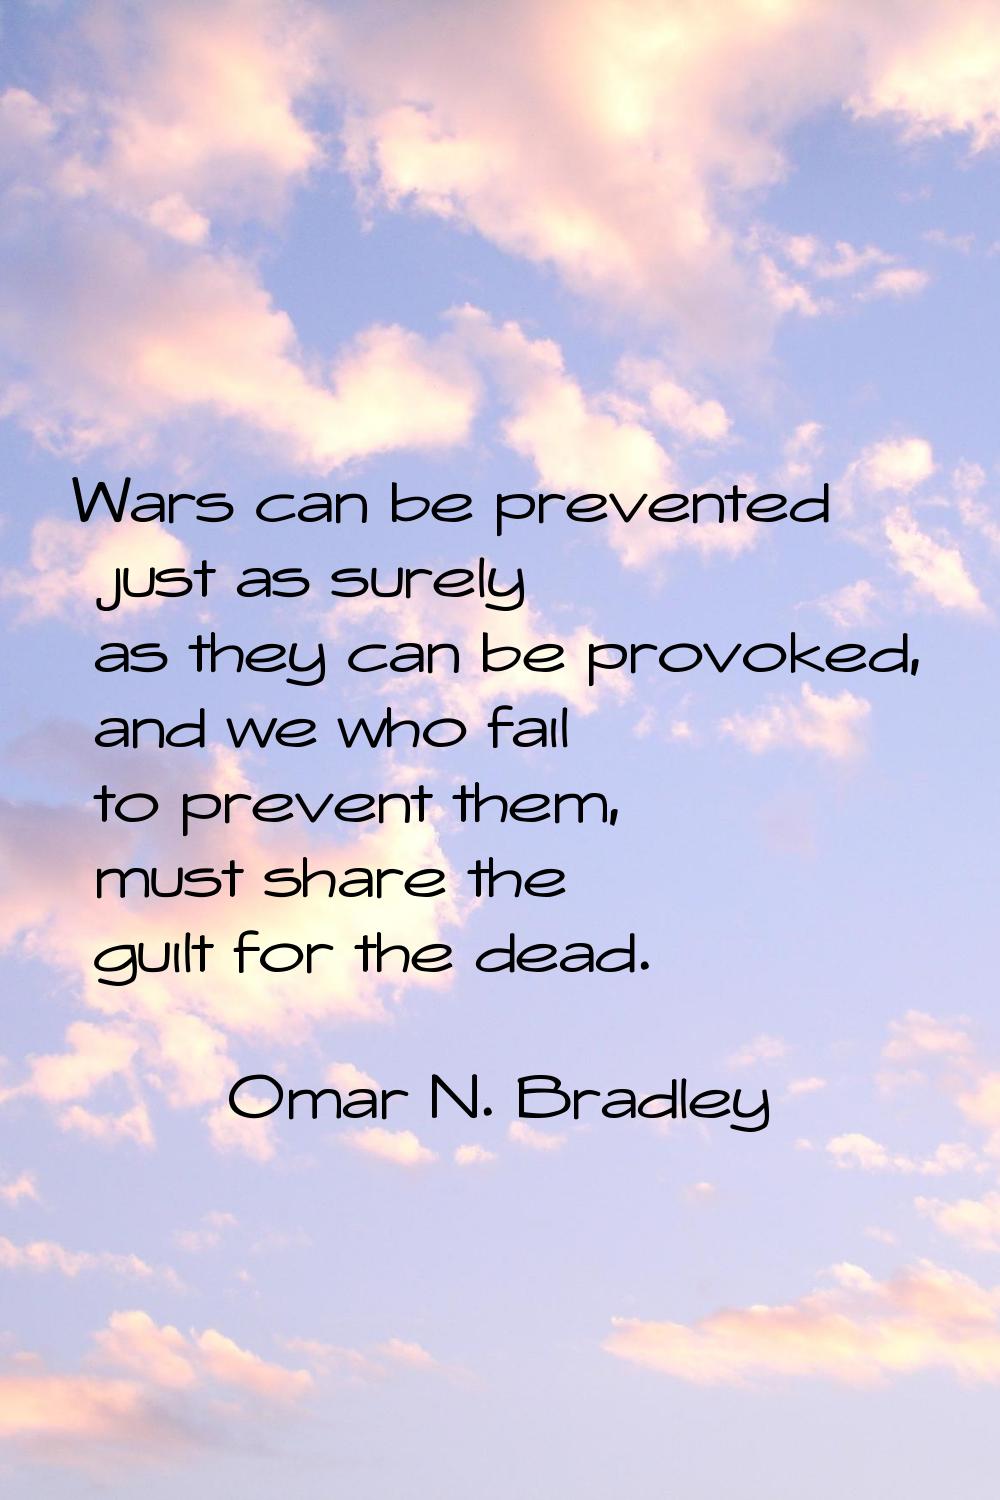 Wars can be prevented just as surely as they can be provoked, and we who fail to prevent them, must